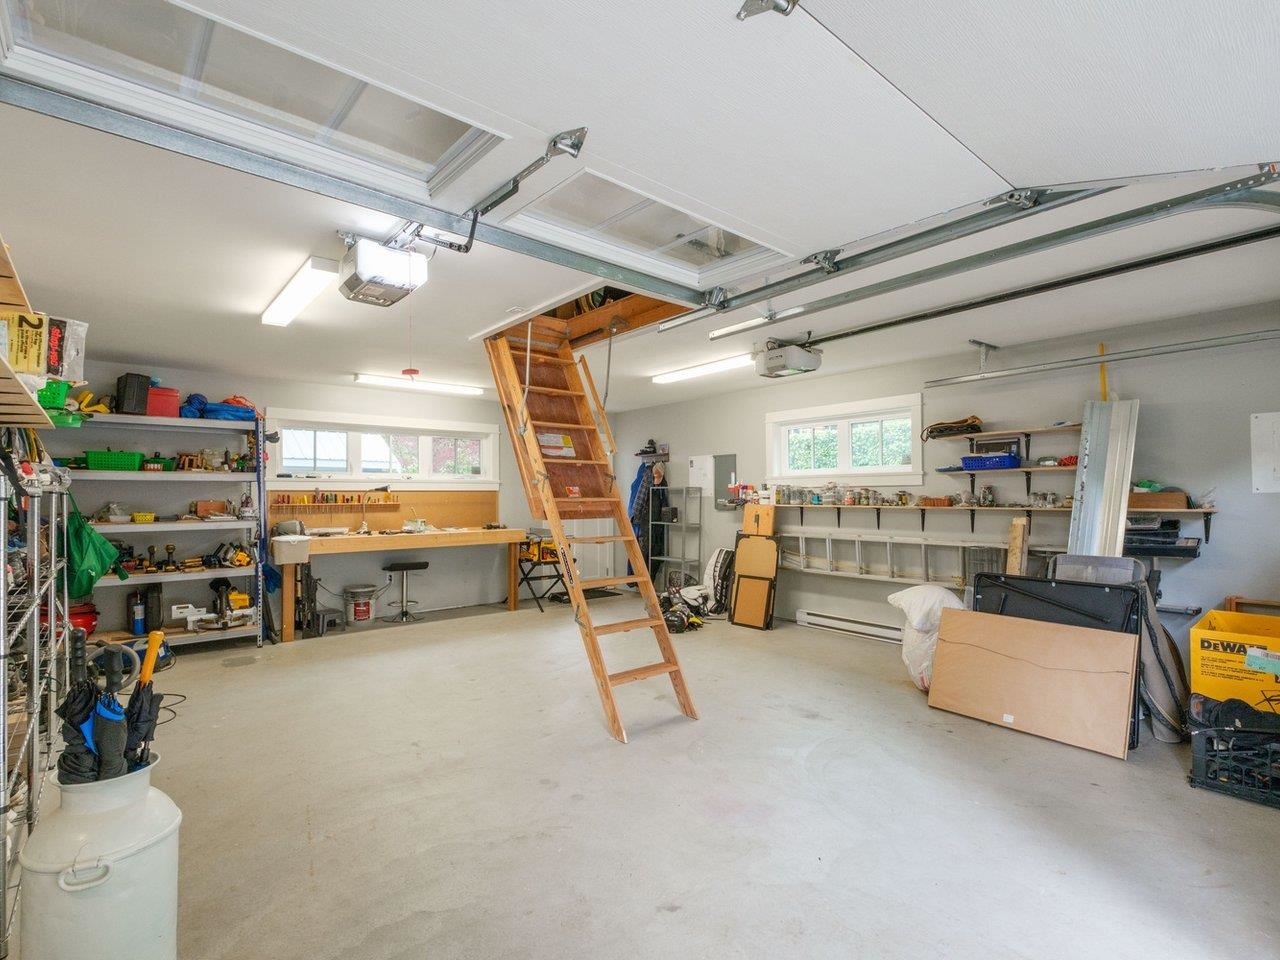 Large garage with lots of easy access attic space totalling some 284 sq.ft.!